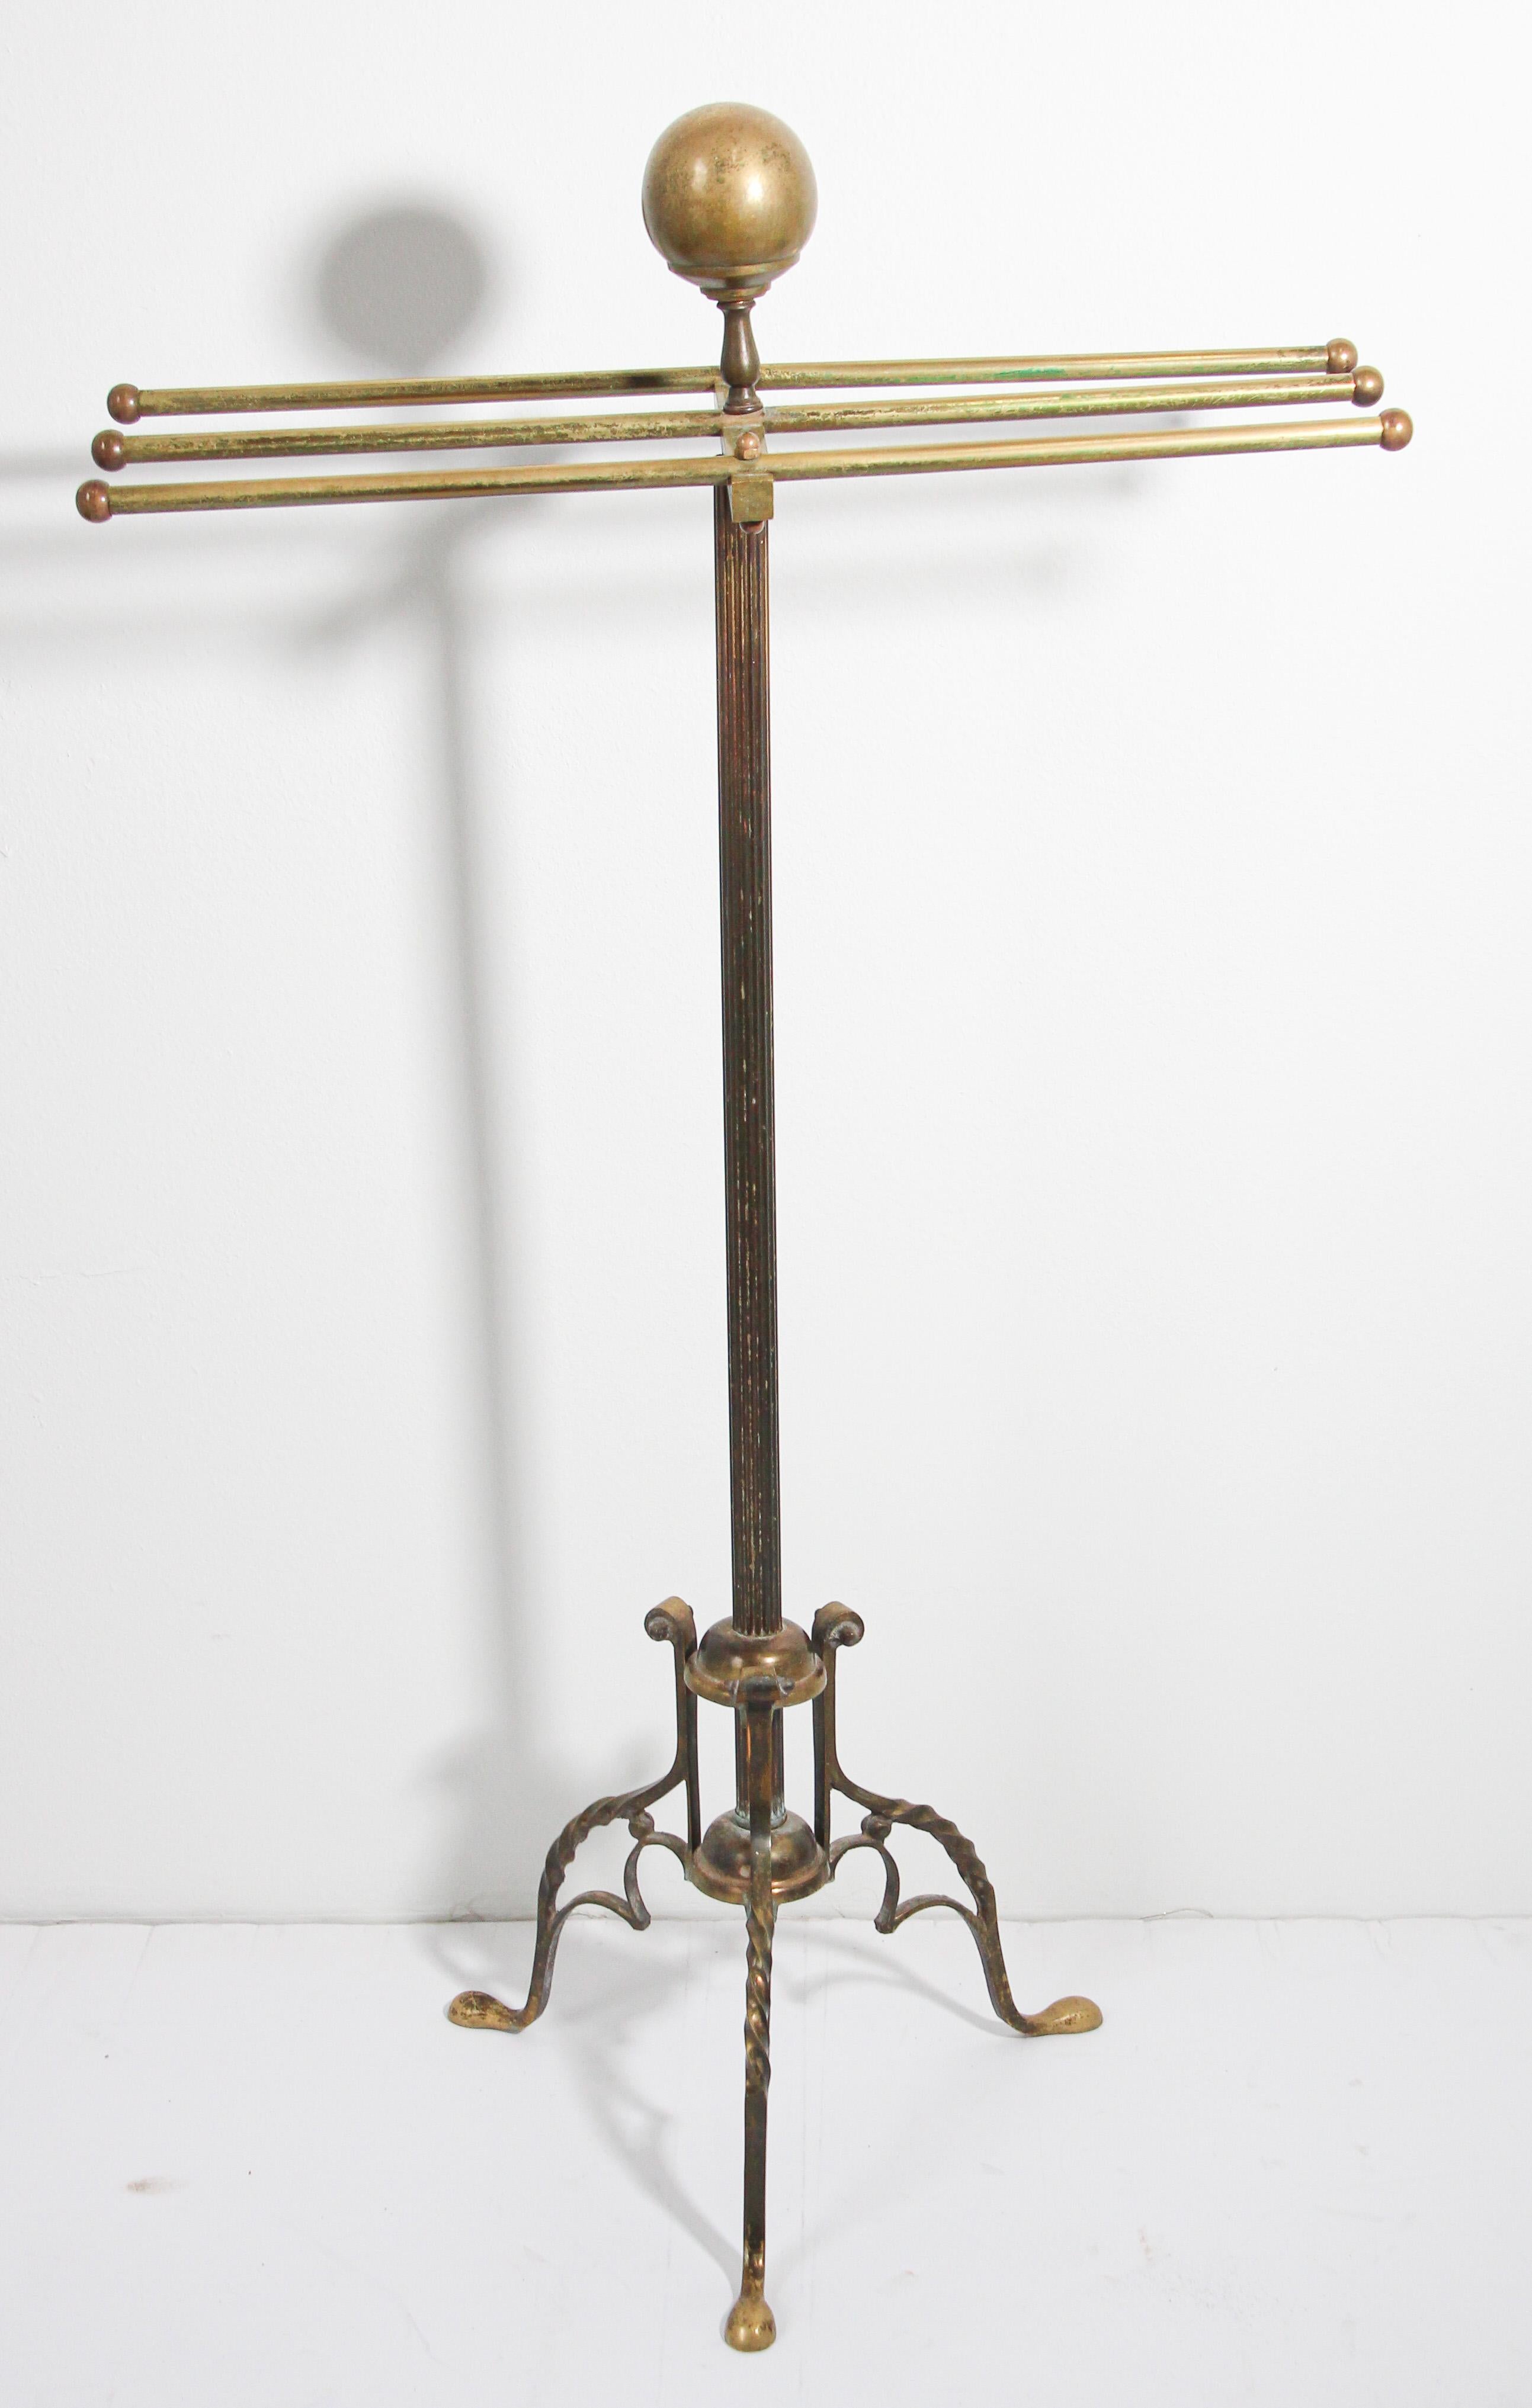 Hollywood Regency antique style brass valet towel stand.
Stylish and elegant brass valet stand.
Perfect for any gentleman's closet, bedroom or bathroom.
Manufacturer: Glo-Mar Artworks
Materials: Brass
Age: 1950's
Dimensions
14